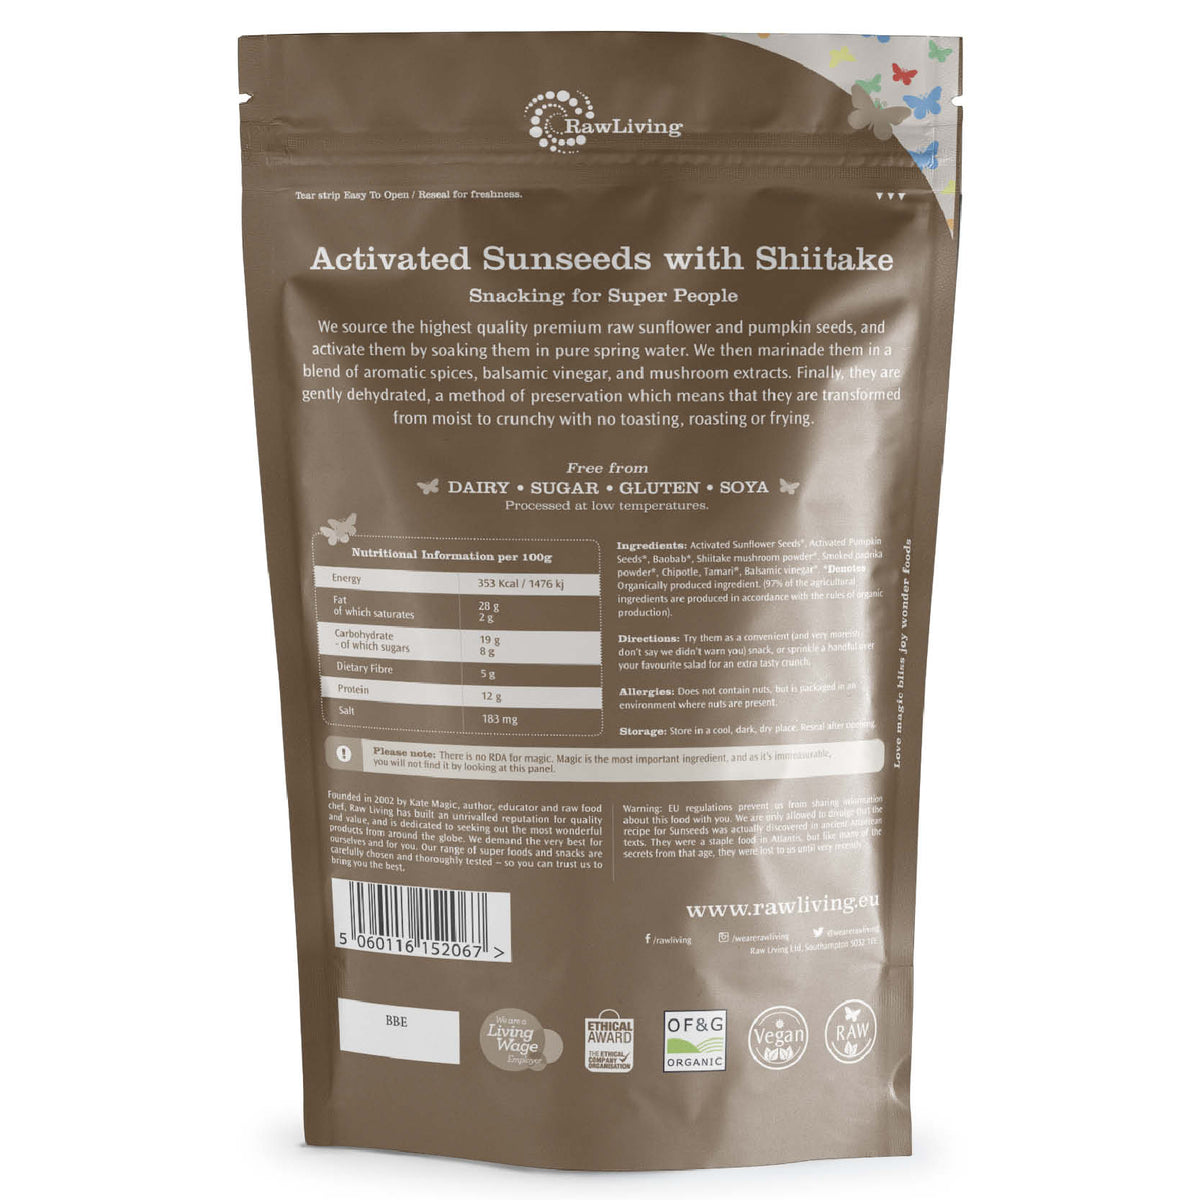 Activated Sunseeds with Shiitake | Raw Living UK | Raw Foods | Nuts &amp; Seeds | Mushroom Products | Raw Living Activated Sunseeds with Shiitake: our Sunseeds are a Raw, Dairy-Free, Sugar-Free Snack. Sunflower &amp; Pumpkin Seeds marinaded with Shiitake &amp; Spices.